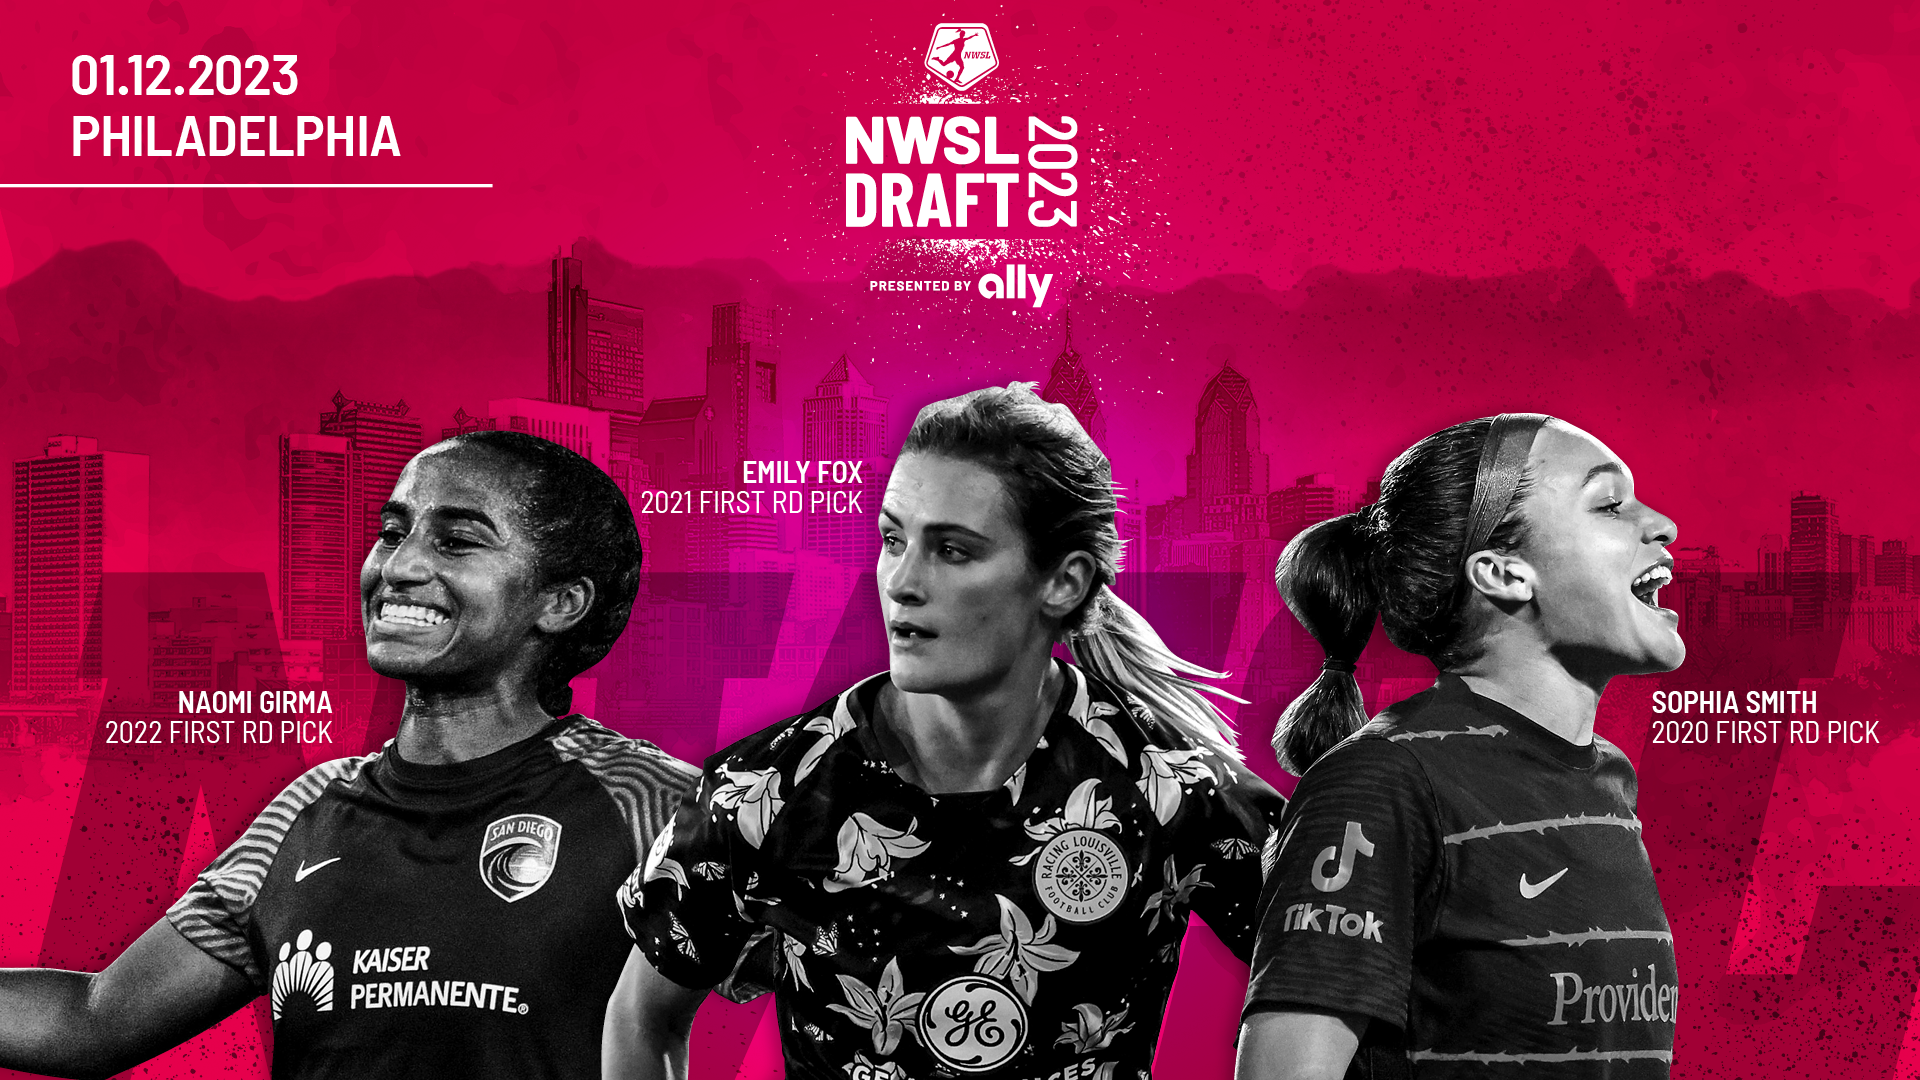 <strong></noscript>Philadelphia to Host 2023 NWSL Draft, Presented by Ally on January 12</strong> Featured Image